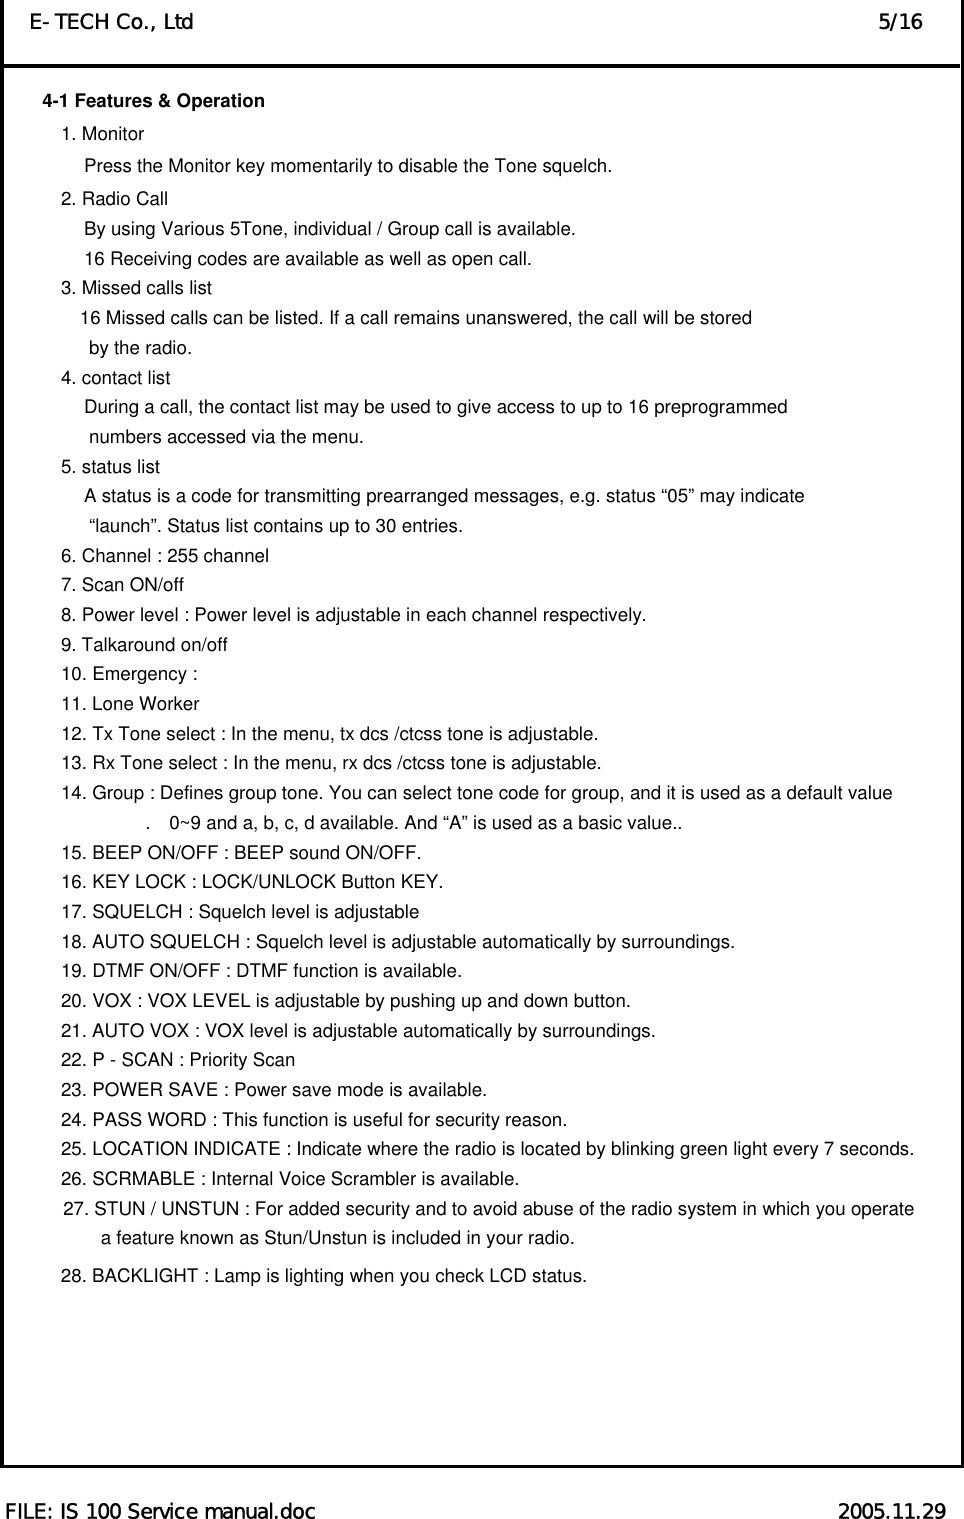  FILE: IS 100 Service manual.doc                                                   2005.11.29 E-TECH Co., Ltd                                                                   5/16 4-1 Features &amp; Operation         1. Monitor                  Press the Monitor key momentarily to disable the Tone squelch.   2. Radio Call                   By using Various 5Tone, individual / Group call is available.                   16 Receiving codes are available as well as open call. 3. Missed calls list                  16 Missed calls can be listed. If a call remains unanswered, the call will be stored by the radio.   4. contact list                   During a call, the contact list may be used to give access to up to 16 preprogrammed   numbers accessed via the menu.   5. status list                   A status is a code for transmitting prearranged messages, e.g. status “05” may indicate “launch”. Status list contains up to 30 entries. 6. Channel : 255 channel   7. Scan ON/off   8. Power level : Power level is adjustable in each channel respectively.   9. Talkaround on/off   10. Emergency :   11. Lone Worker   12. Tx Tone select : In the menu, tx dcs /ctcss tone is adjustable.   13. Rx Tone select : In the menu, rx dcs /ctcss tone is adjustable.   14. Group : Defines group tone. You can select tone code for group, and it is used as a default value .    0~9 and a, b, c, d available. And “A” is used as a basic value..   15. BEEP ON/OFF : BEEP sound ON/OFF.     16. KEY LOCK : LOCK/UNLOCK Button KEY.   17. SQUELCH : Squelch level is adjustable   18. AUTO SQUELCH : Squelch level is adjustable automatically by surroundings.   19. DTMF ON/OFF : DTMF function is available.   20. VOX : VOX LEVEL is adjustable by pushing up and down button.   21. AUTO VOX : VOX level is adjustable automatically by surroundings.   22. P - SCAN : Priority Scan   23. POWER SAVE : Power save mode is available.   24. PASS WORD : This function is useful for security reason.   25. LOCATION INDICATE : Indicate where the radio is located by blinking green light every 7 seconds.   26. SCRMABLE : Internal Voice Scrambler is available.   27. STUN / UNSTUN : For added security and to avoid abuse of the radio system in which you operate     a feature known as Stun/Unstun is included in your radio. 28. BACKLIGHT : Lamp is lighting when you check LCD status.          